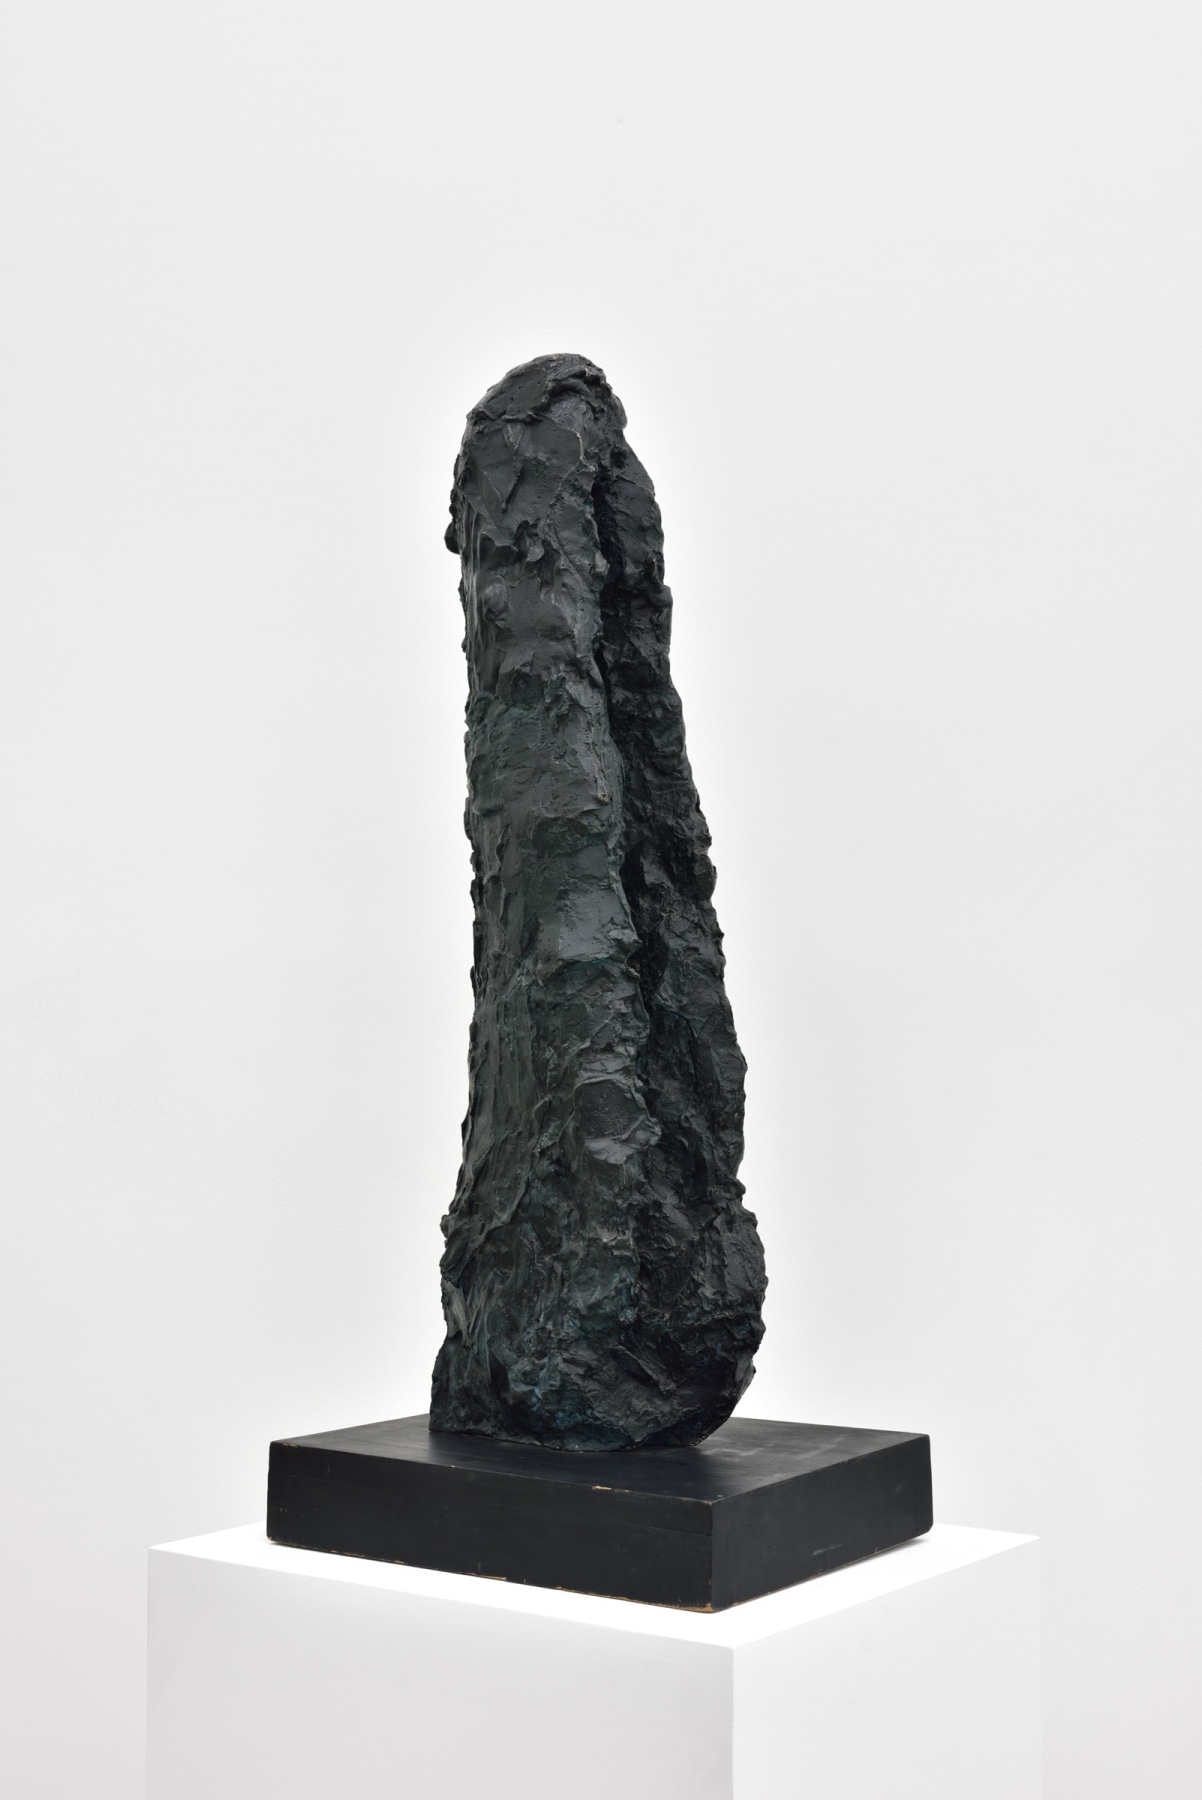 Per Kirkeby

&amp;ldquo;Arm&amp;rdquo;, 1983

Bronze

From an edition of 6 + 1 AP

34 3/4 x 6 1/4 x 12 1/4 inches

88 x 16 x 31 cm

PKK 24/2